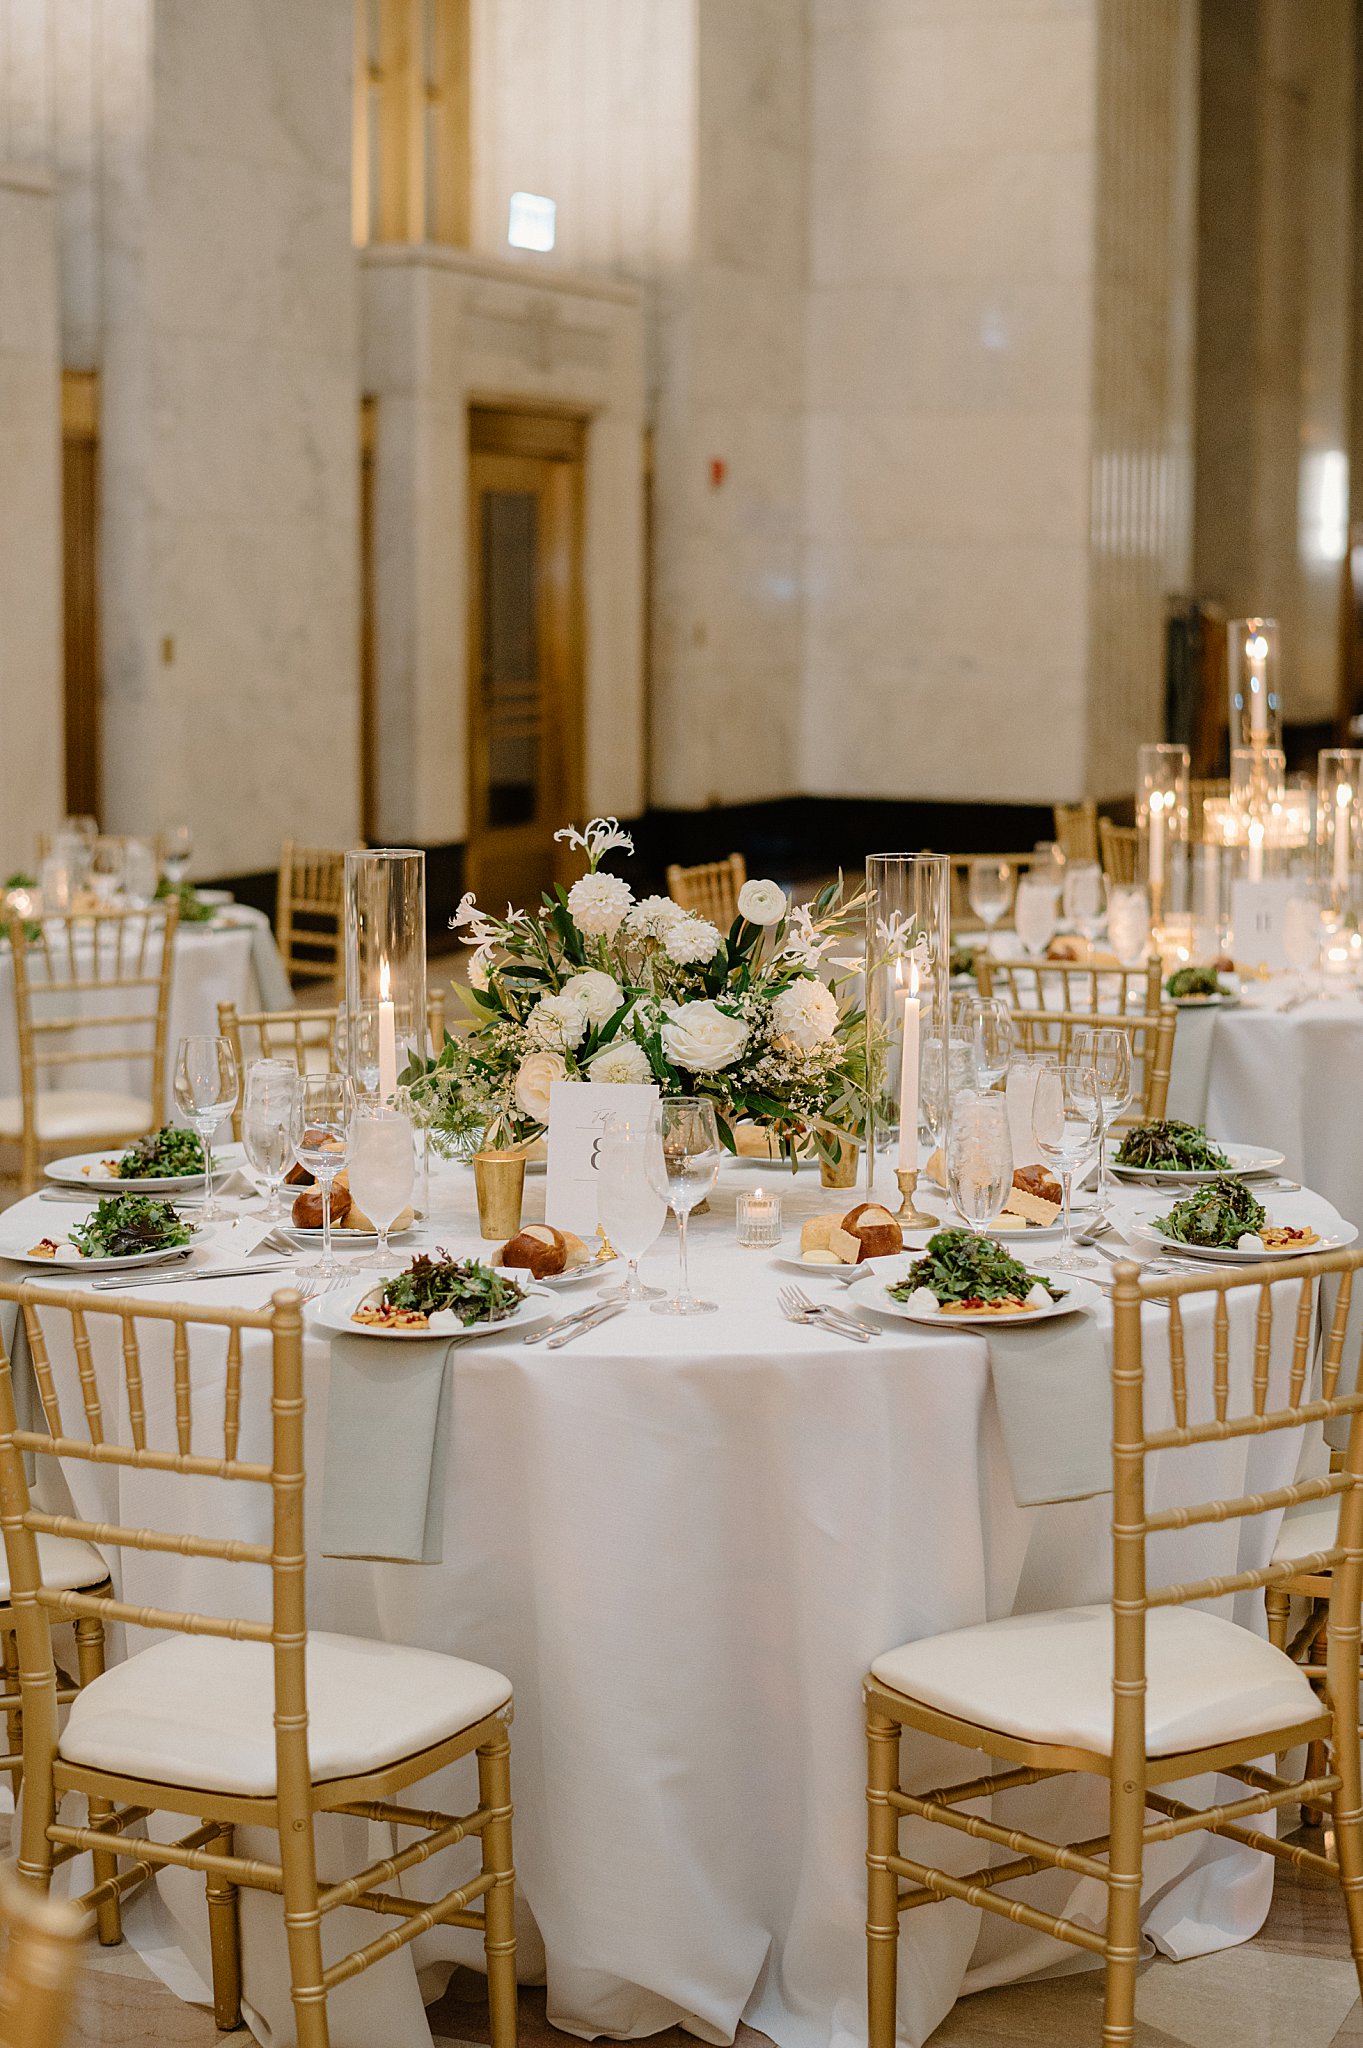 reception table set with white florals and gold chairs by Indigo Lace Collective